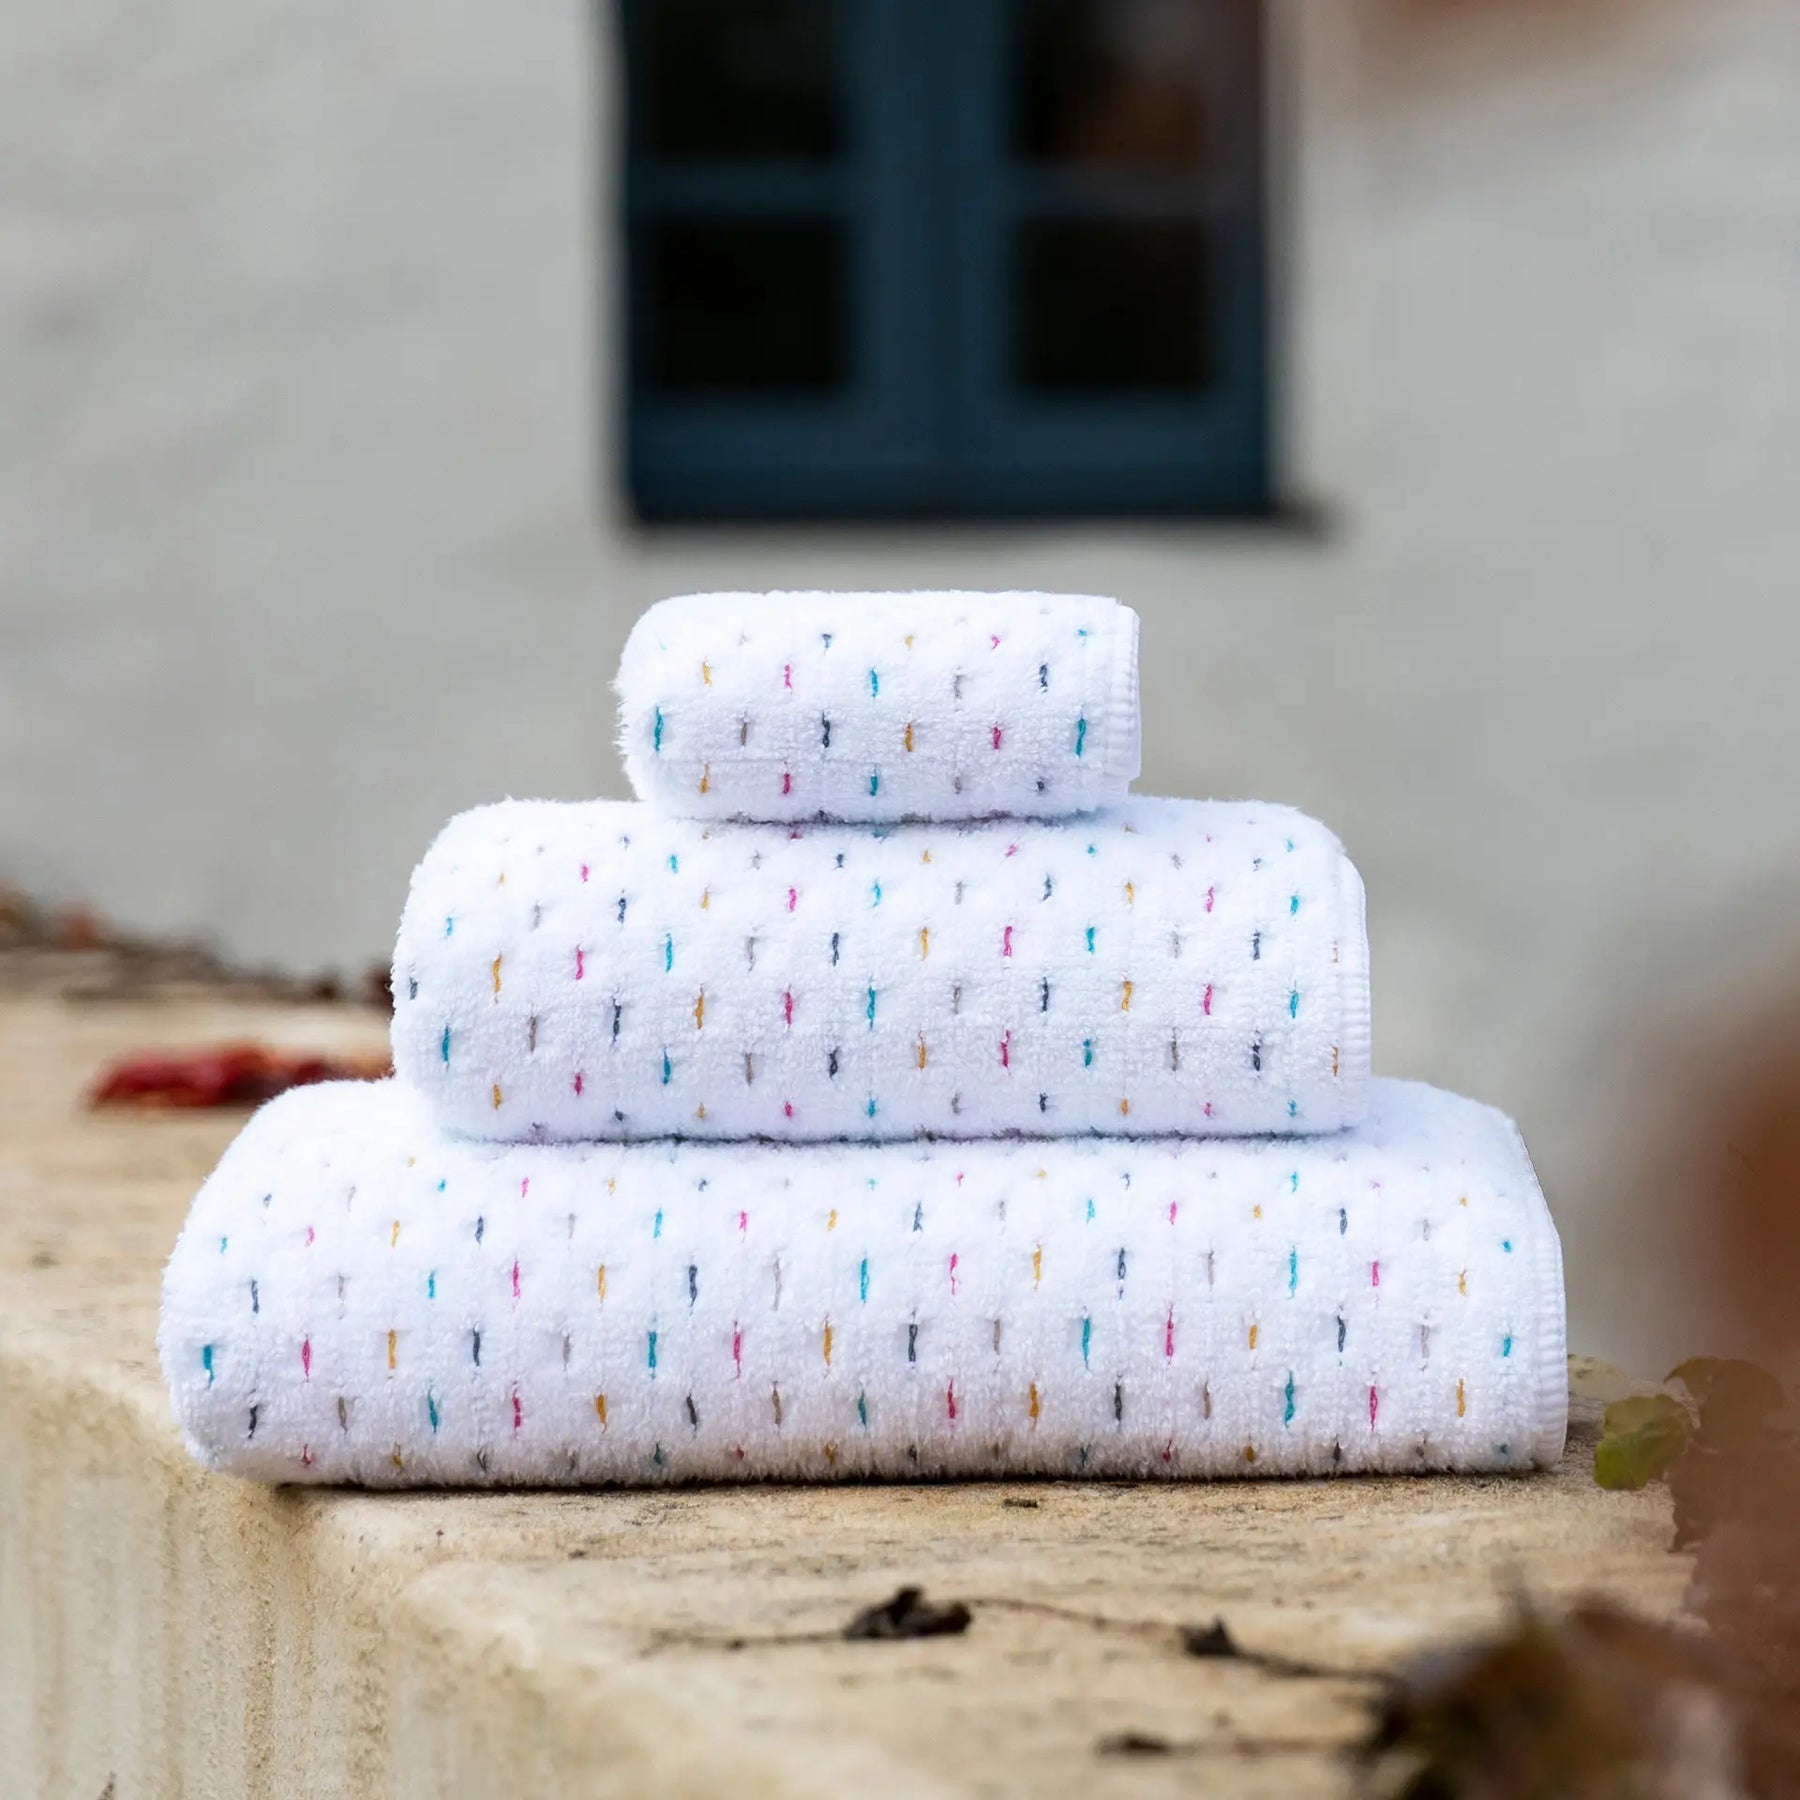 Stack of Graccioza Joy Bath Towels in an outdoor setting on a ledge